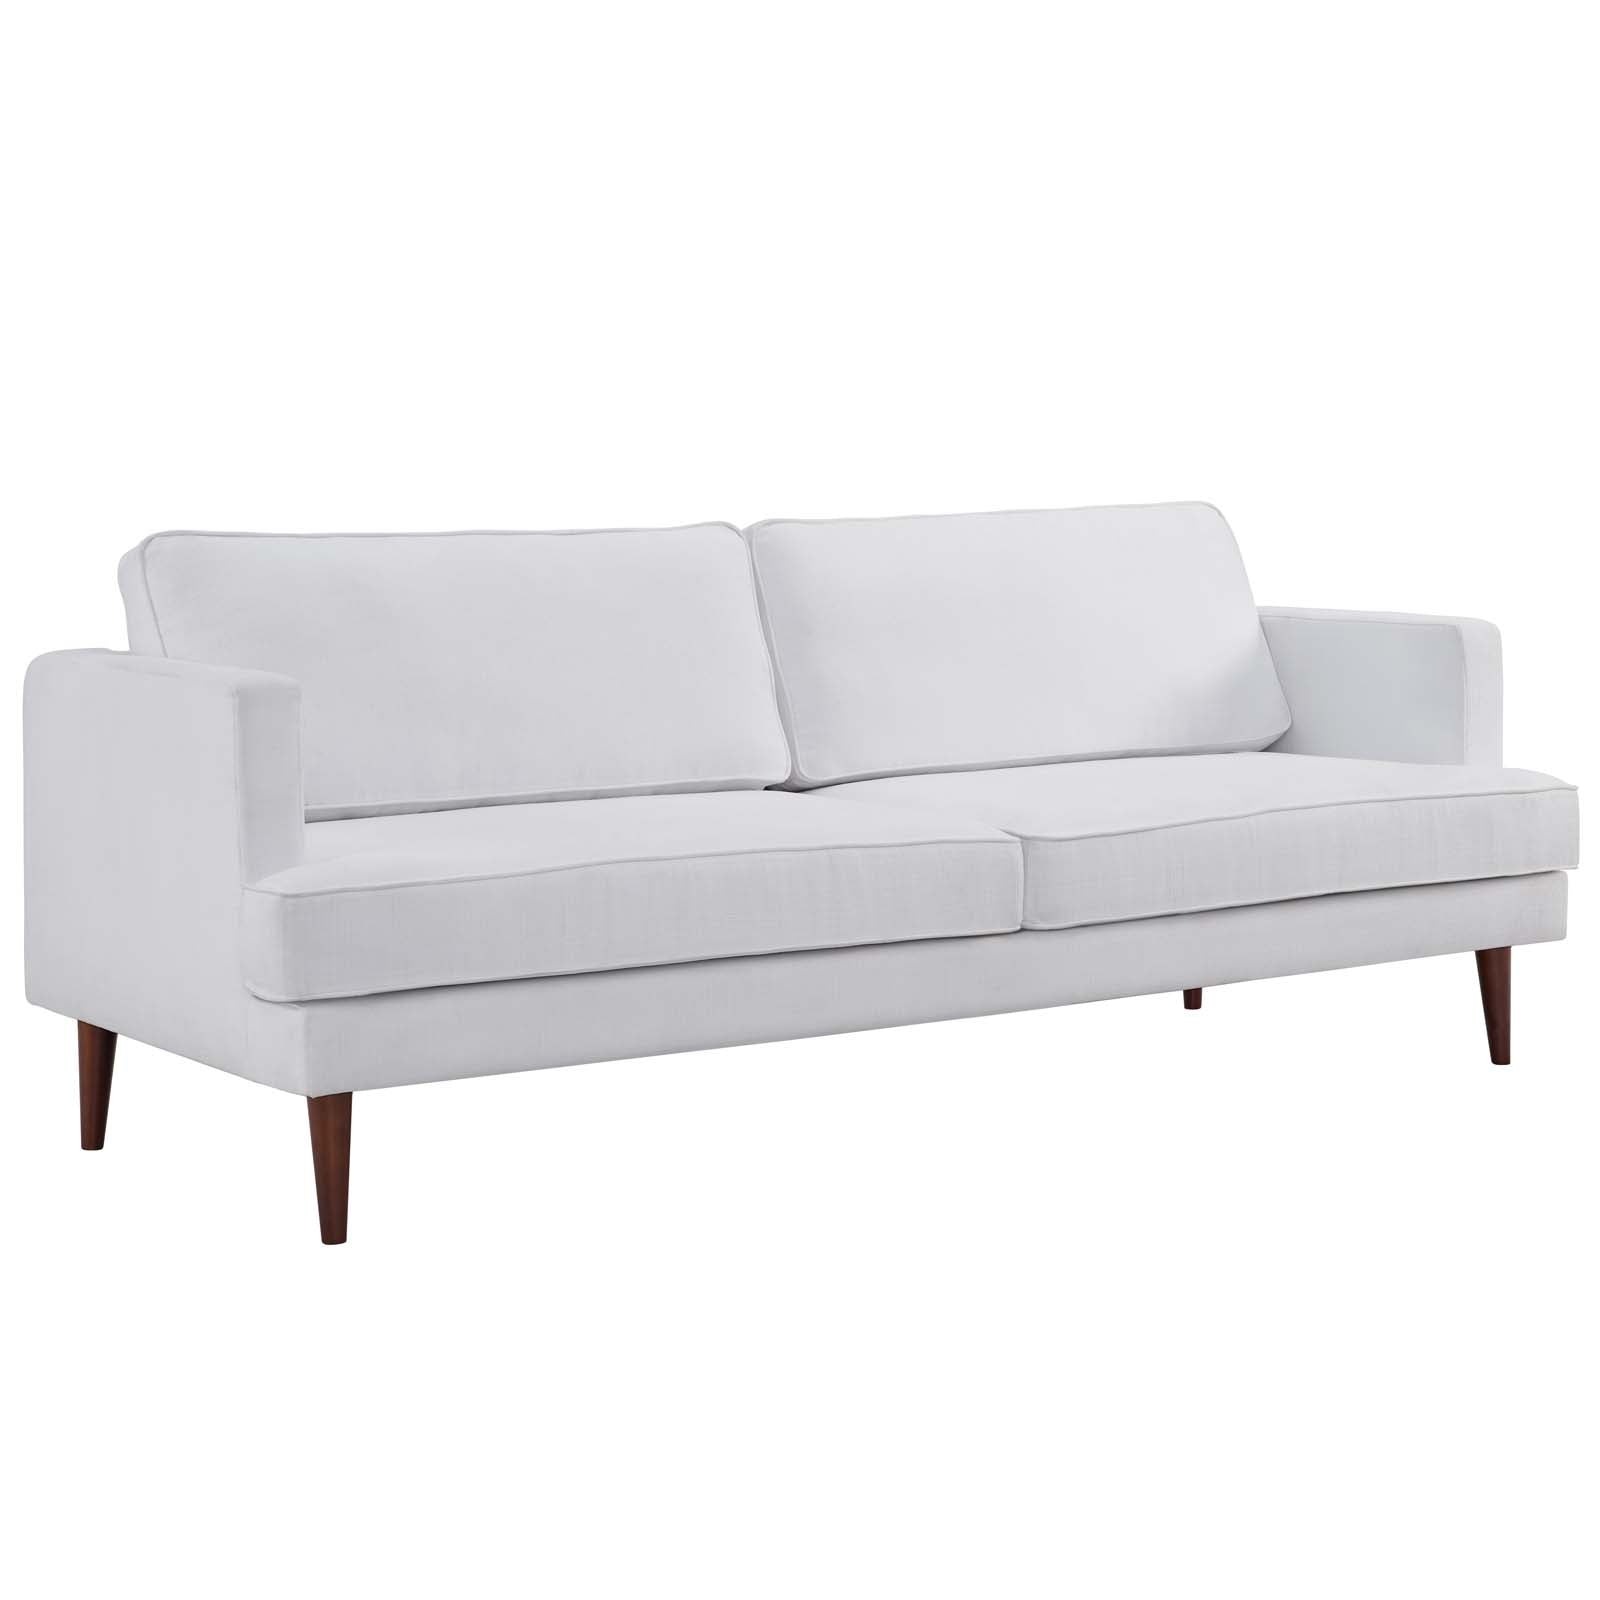 Modway Living Room Sets - Agile 3 Piece Upholstered Fabric Set White